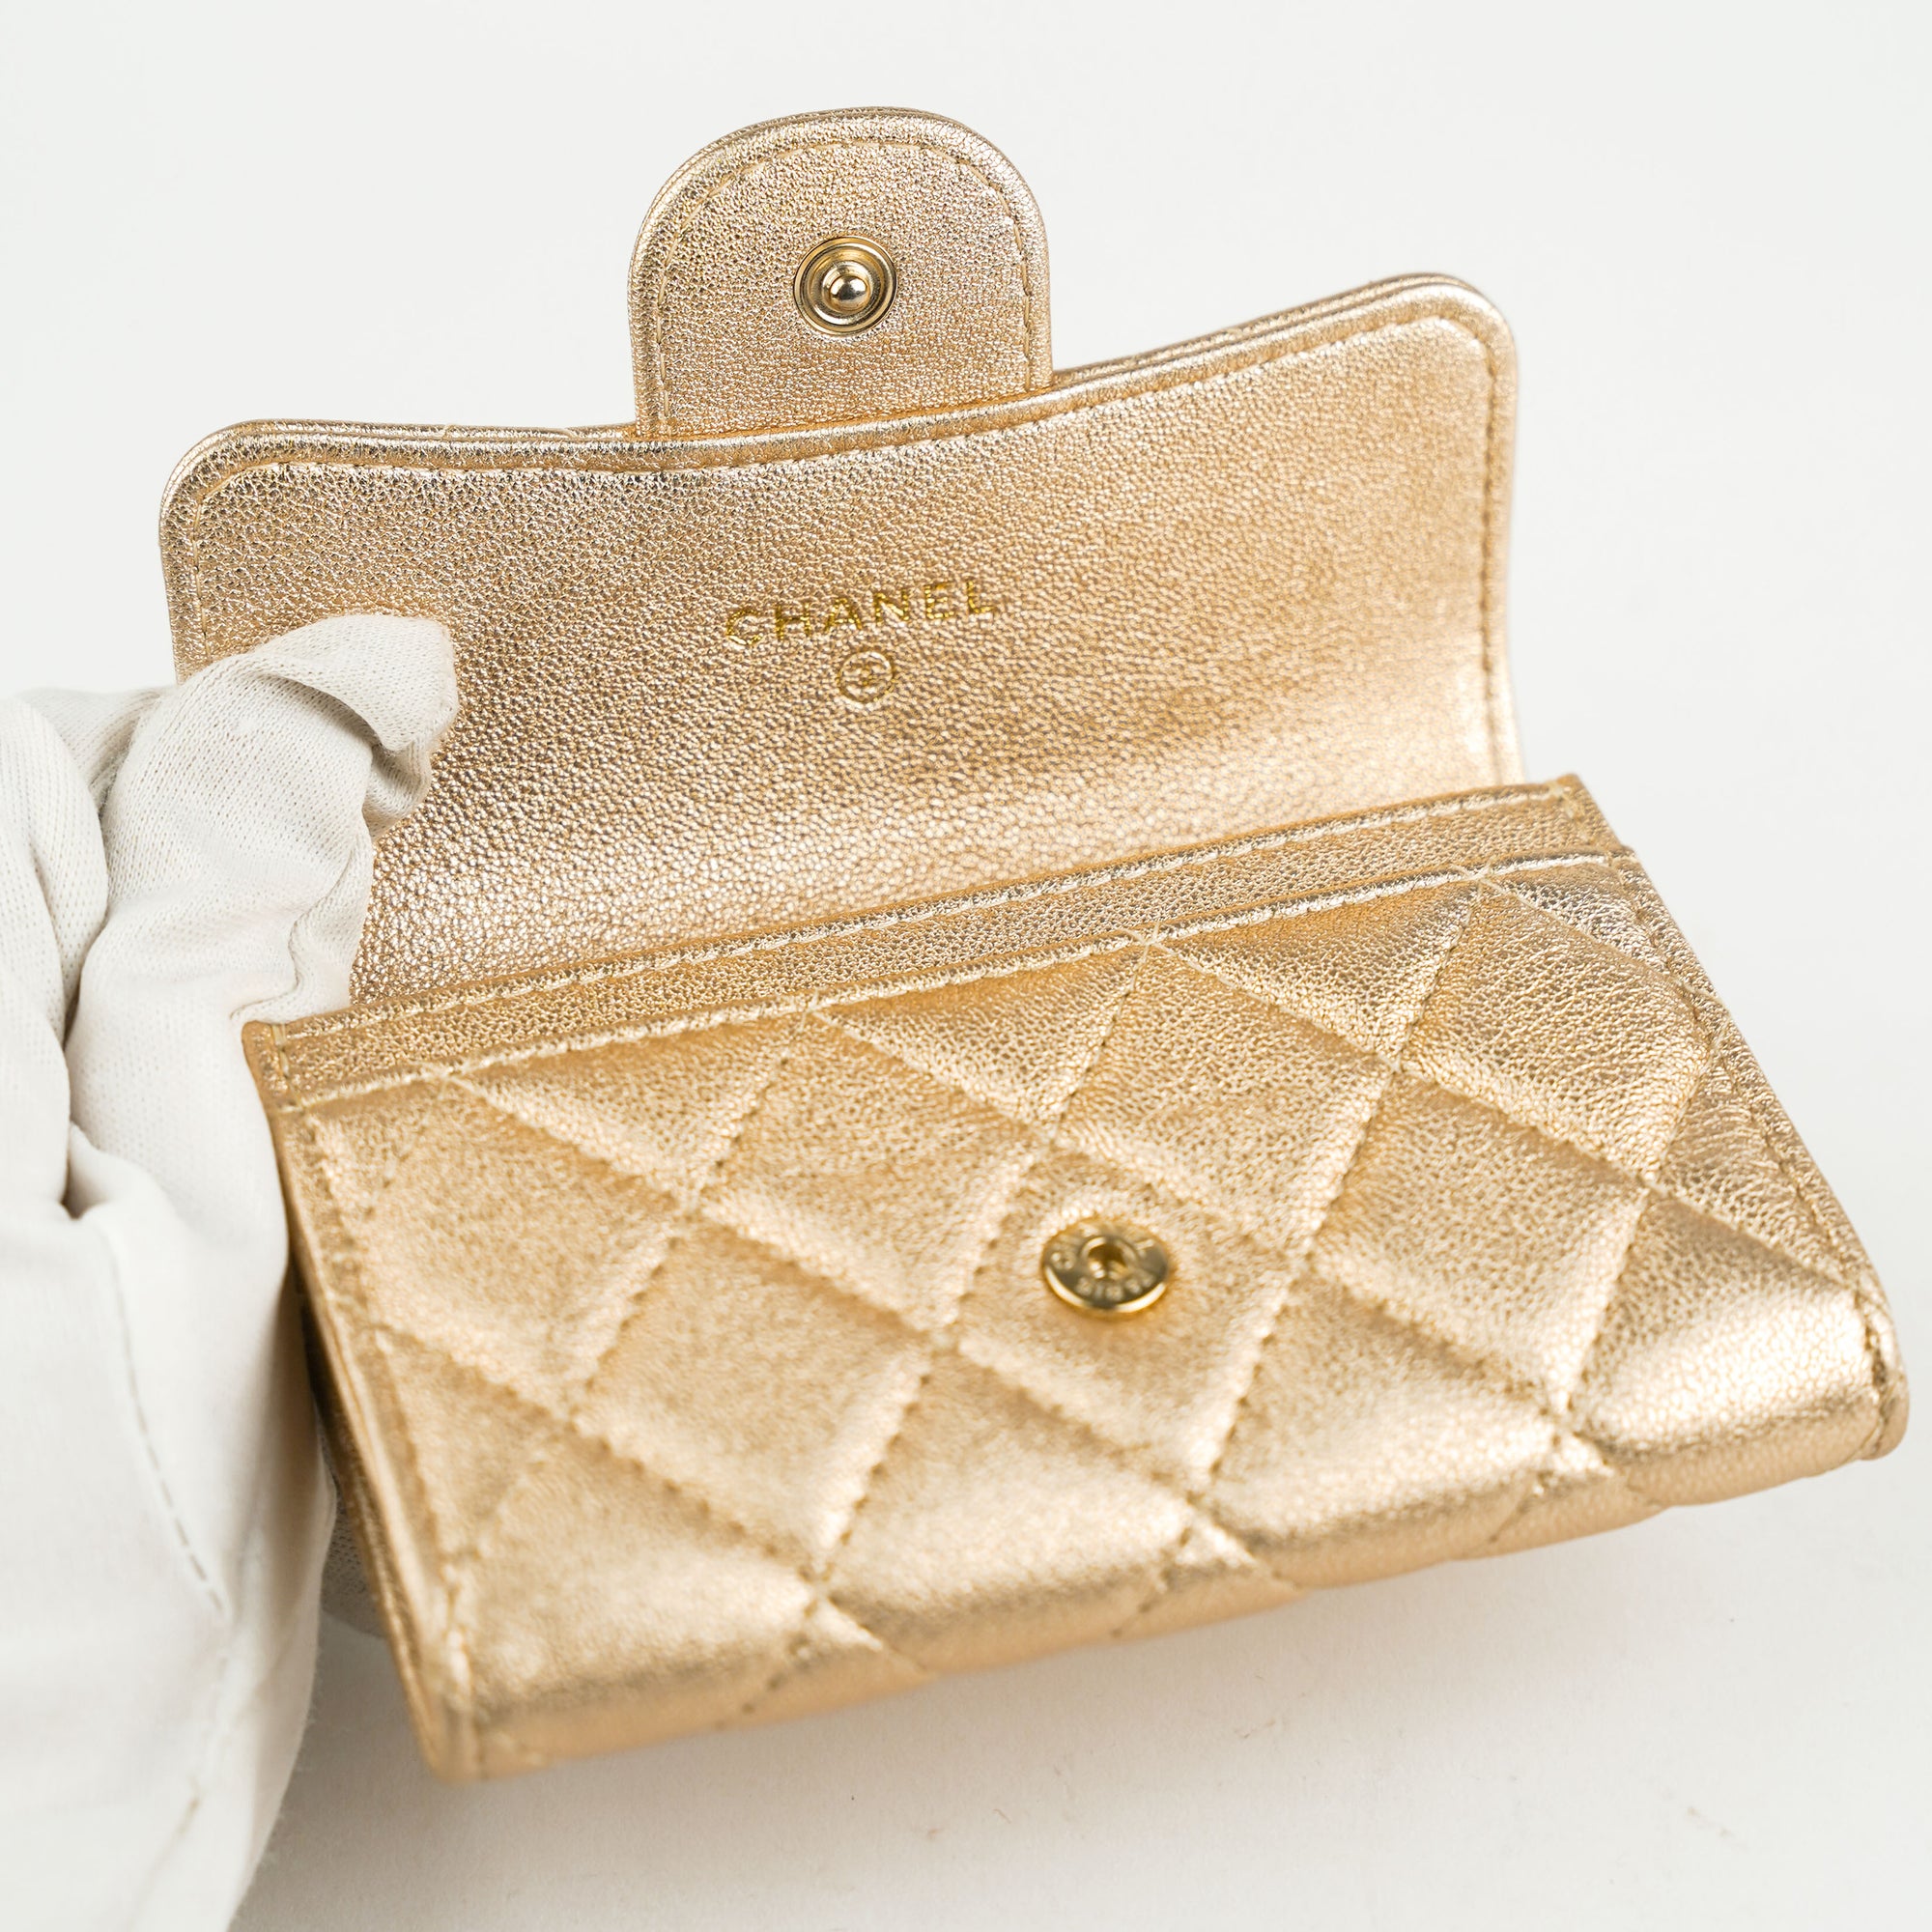 CHANEL Metallic Lambskin Quilted Flap Card Holder Wallet Gold 1150475   FASHIONPHILE